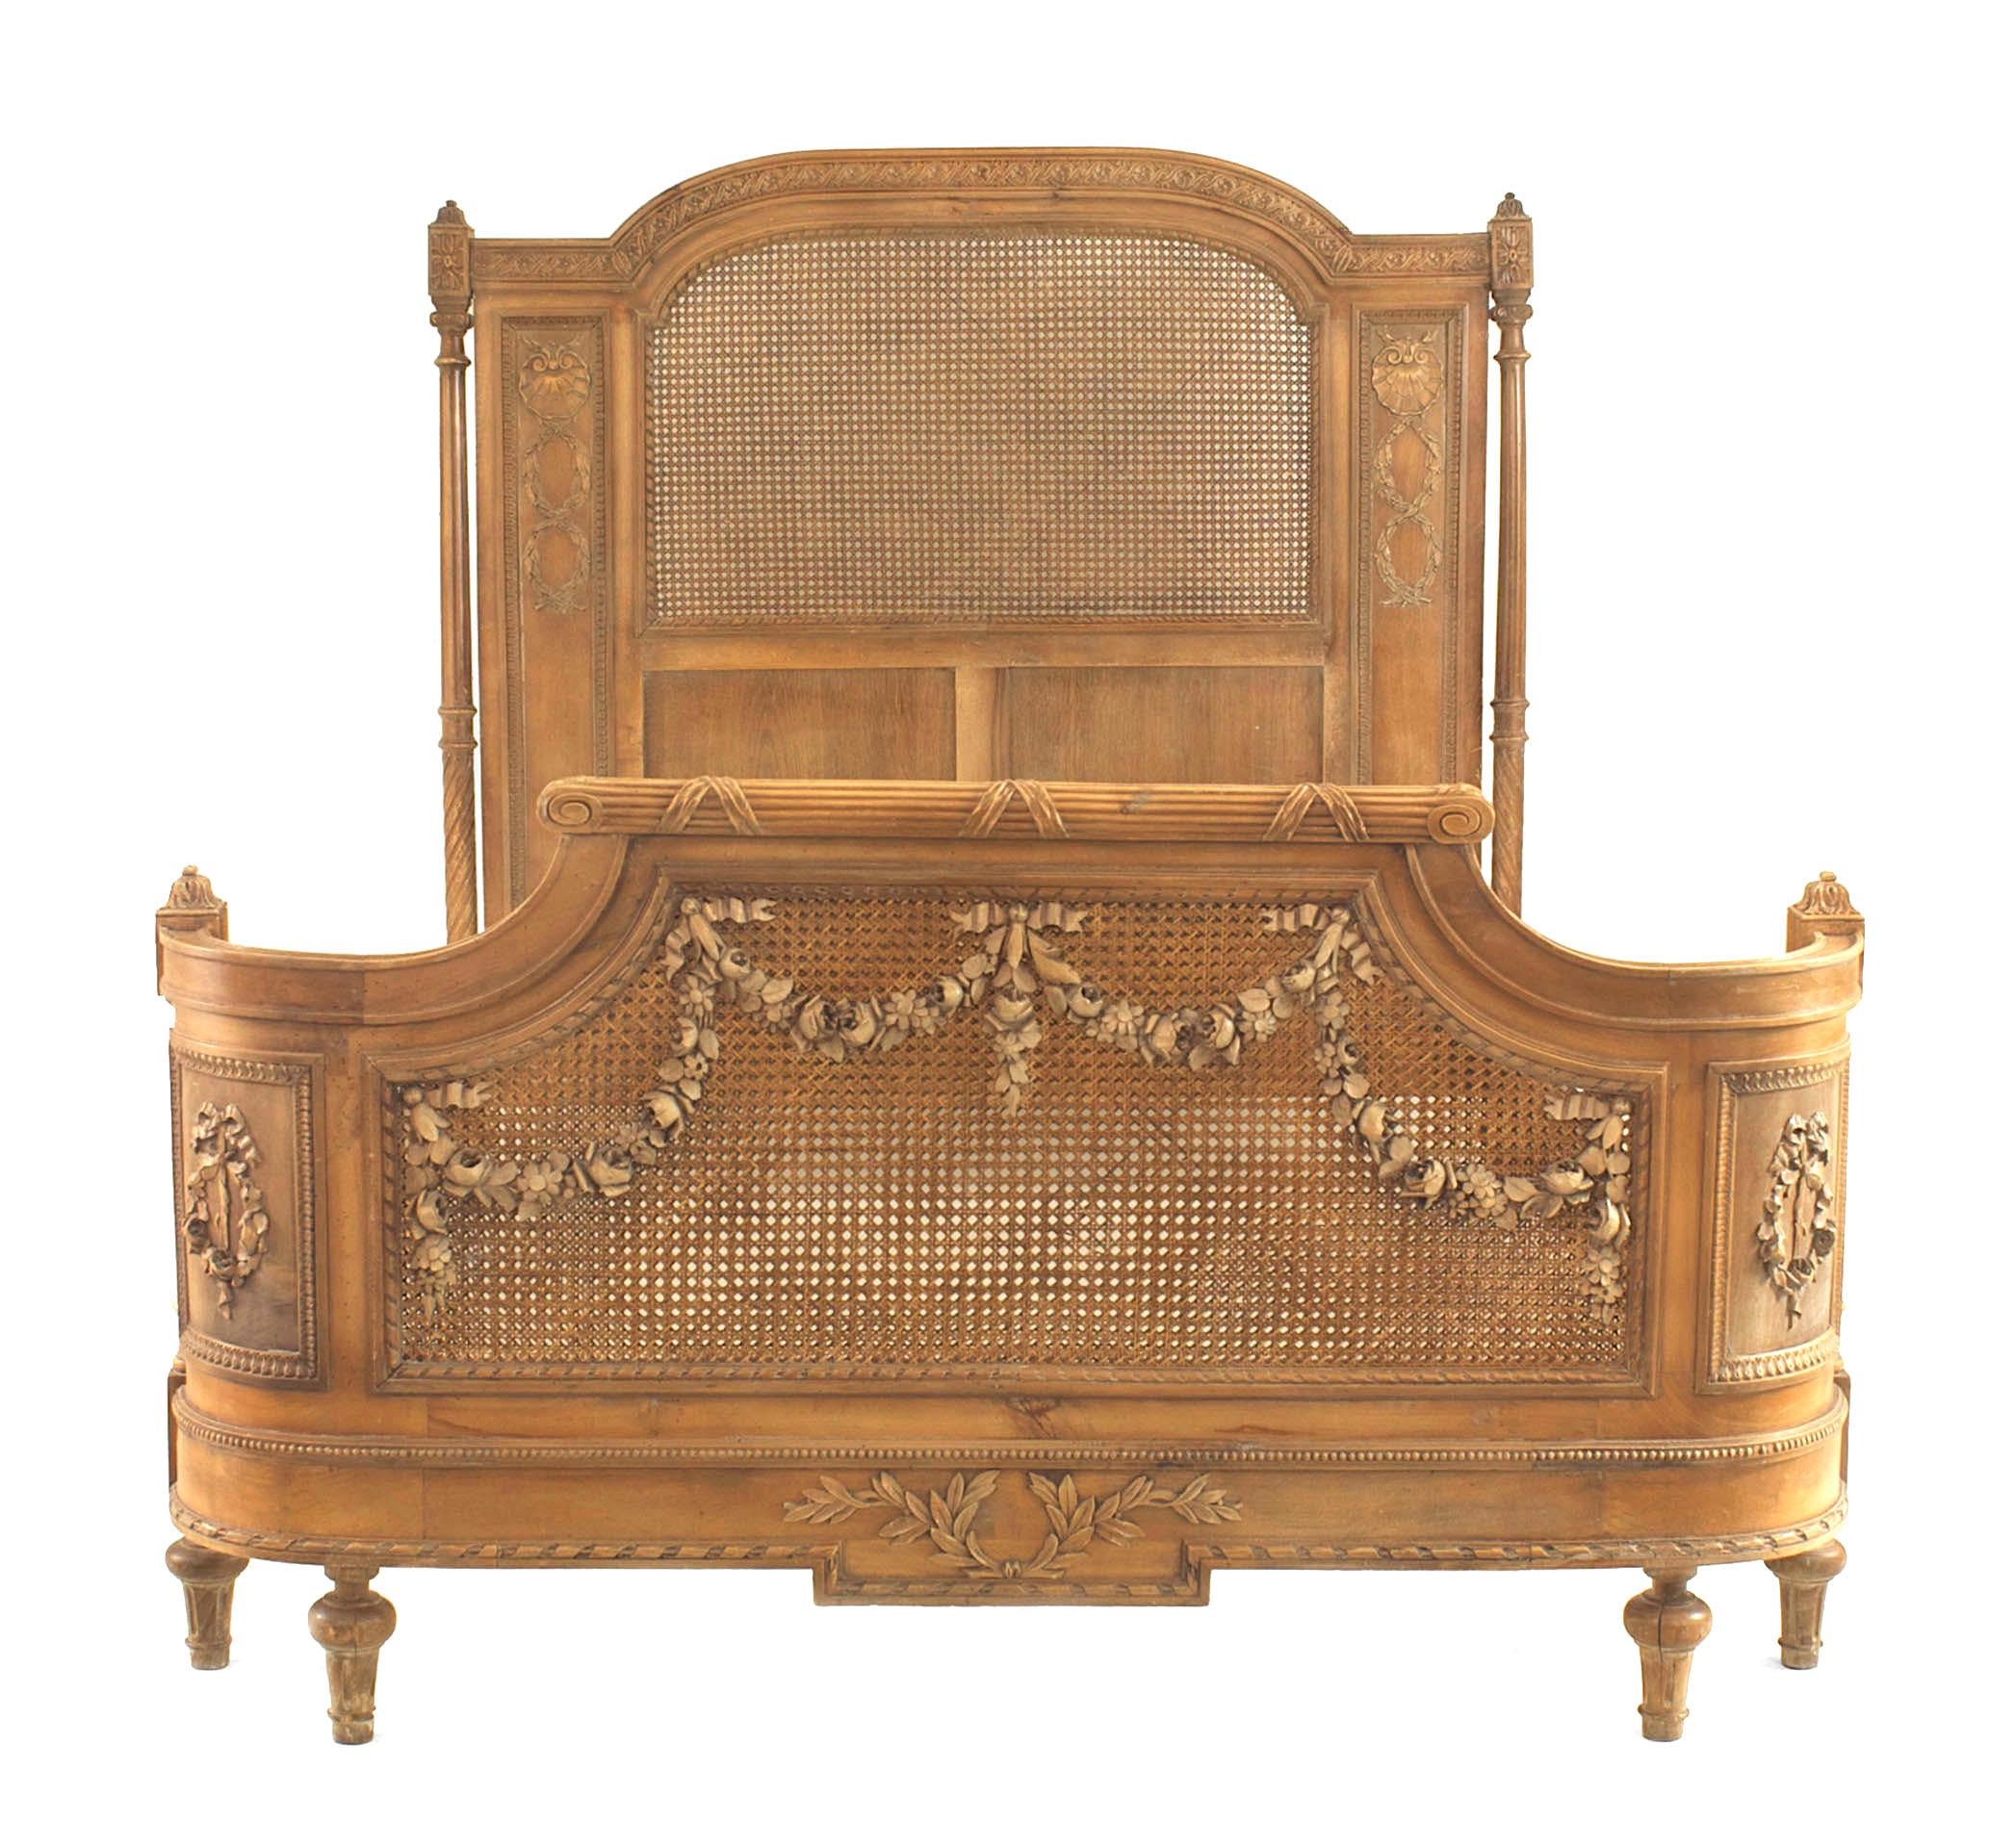 Turn of the century French Louis XVI style walnut full size bed with a cane panel headboard and footboard with rounded sides and a center cane panel with a carved festoon design with rails.